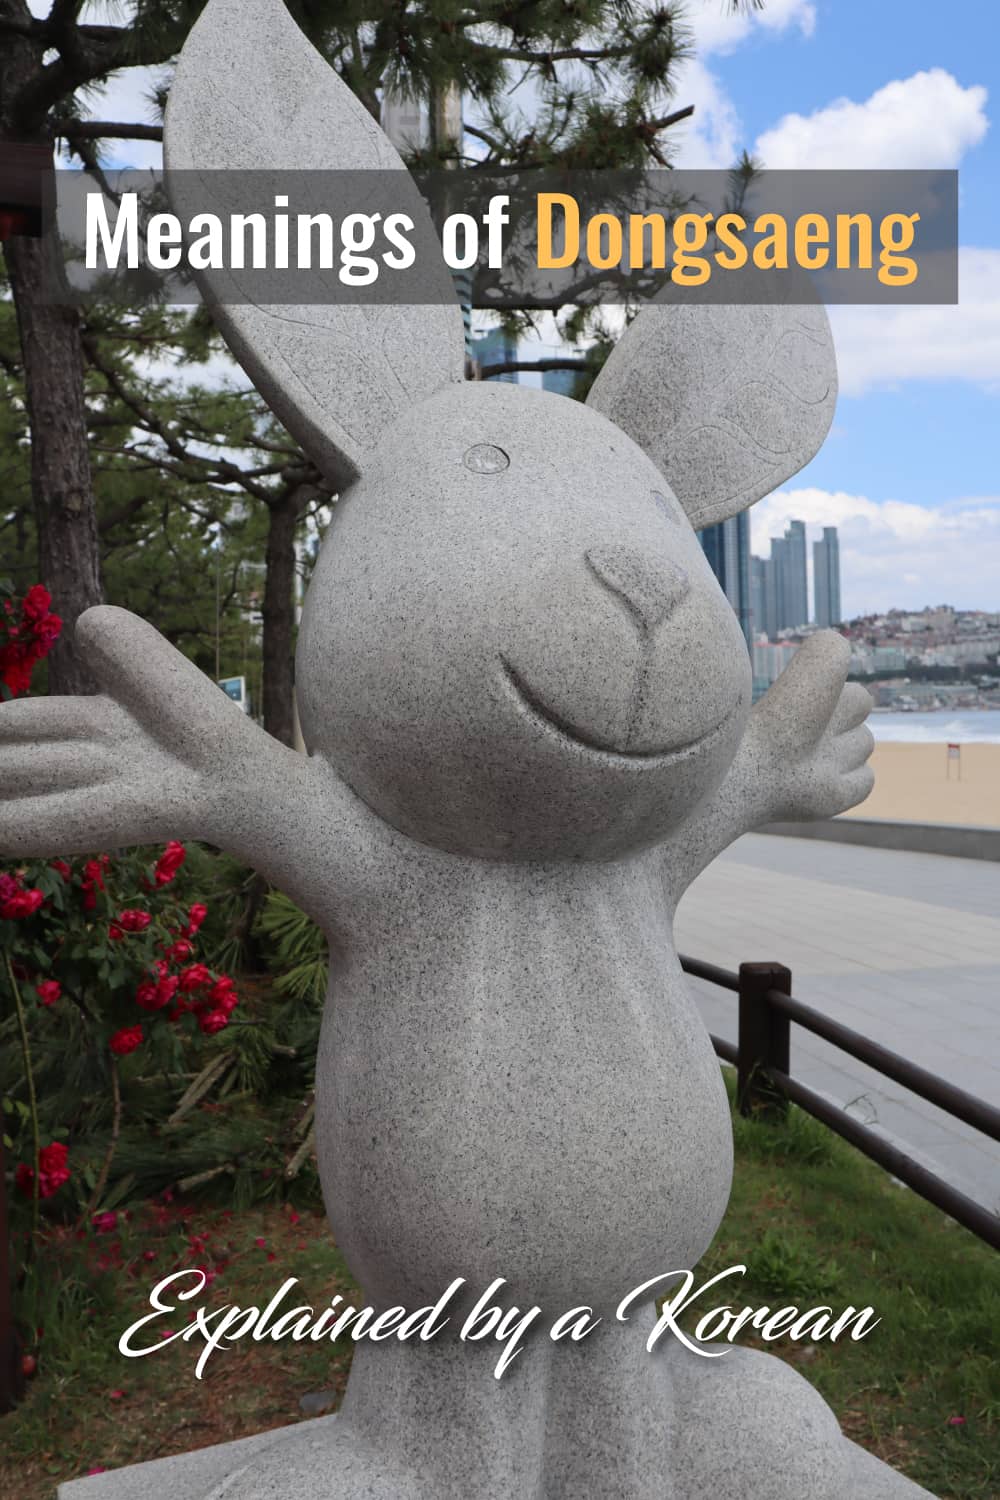 Lingua Asia Meanings of Dongsaeng and How to Use Them Right